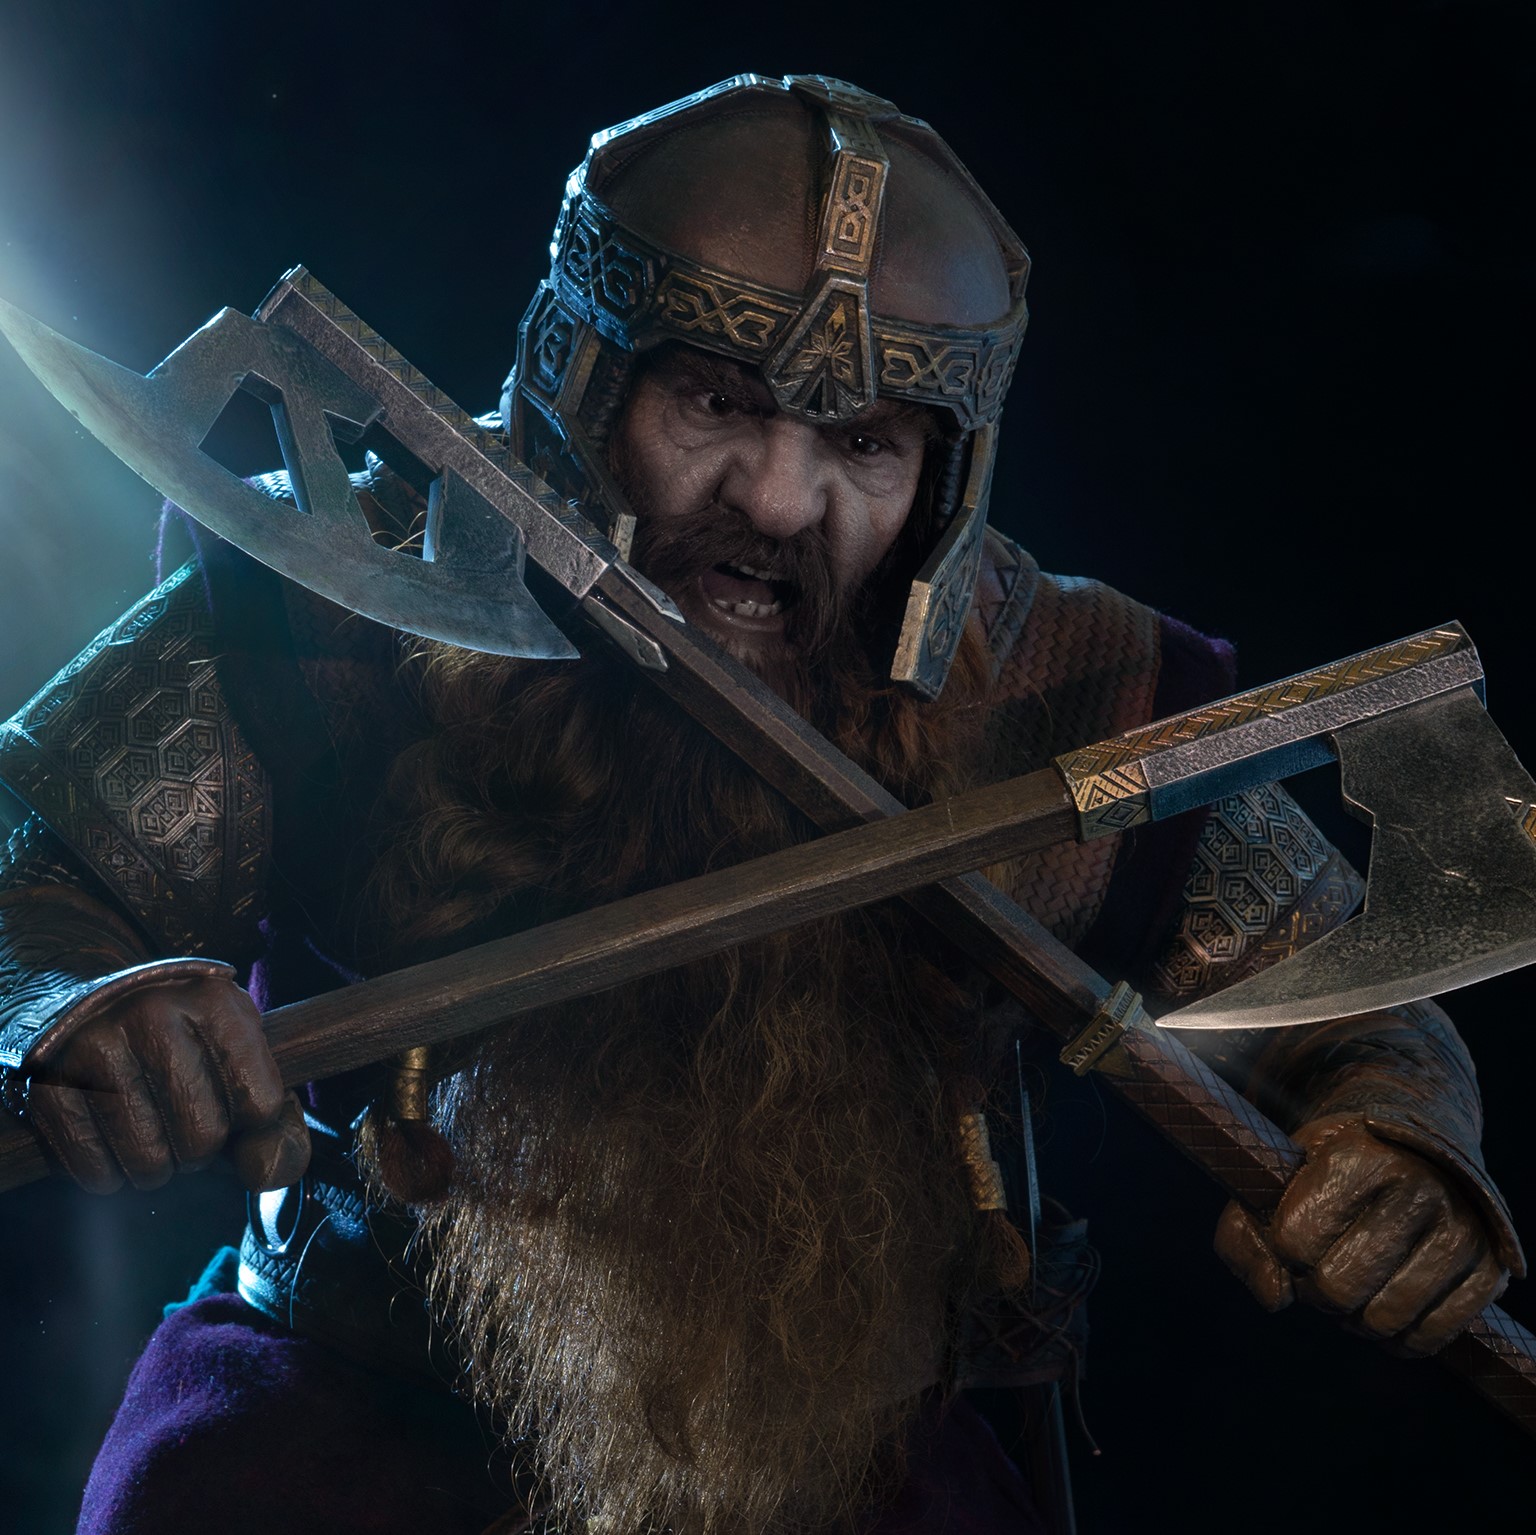 Small But Clever Details About Gimli That 'Lord Of The Rings' Fans Noticed